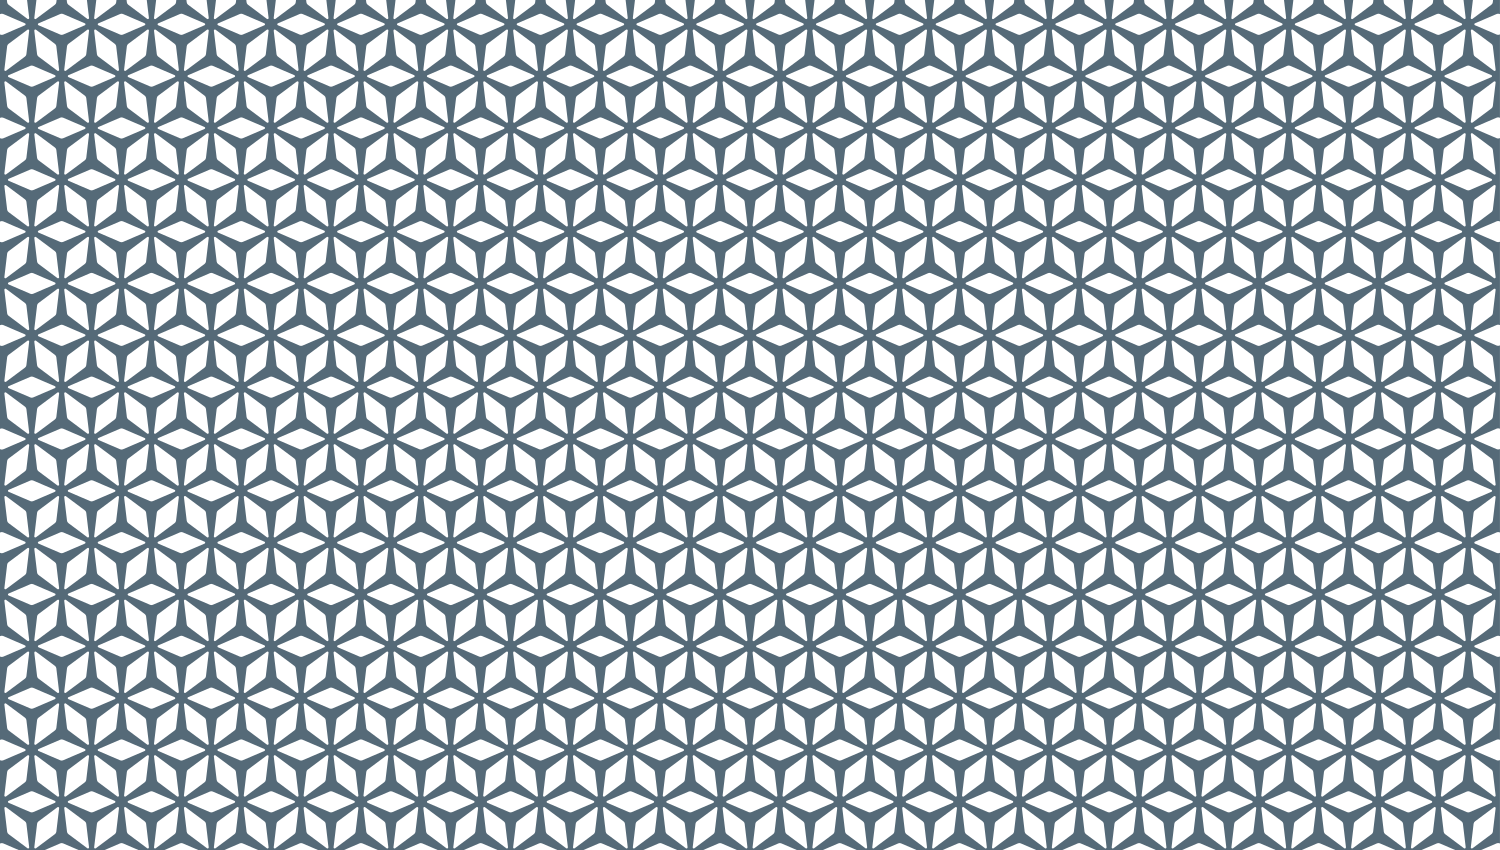 Parasoleil™ Tesseract© pattern displayed with a blue color overlay